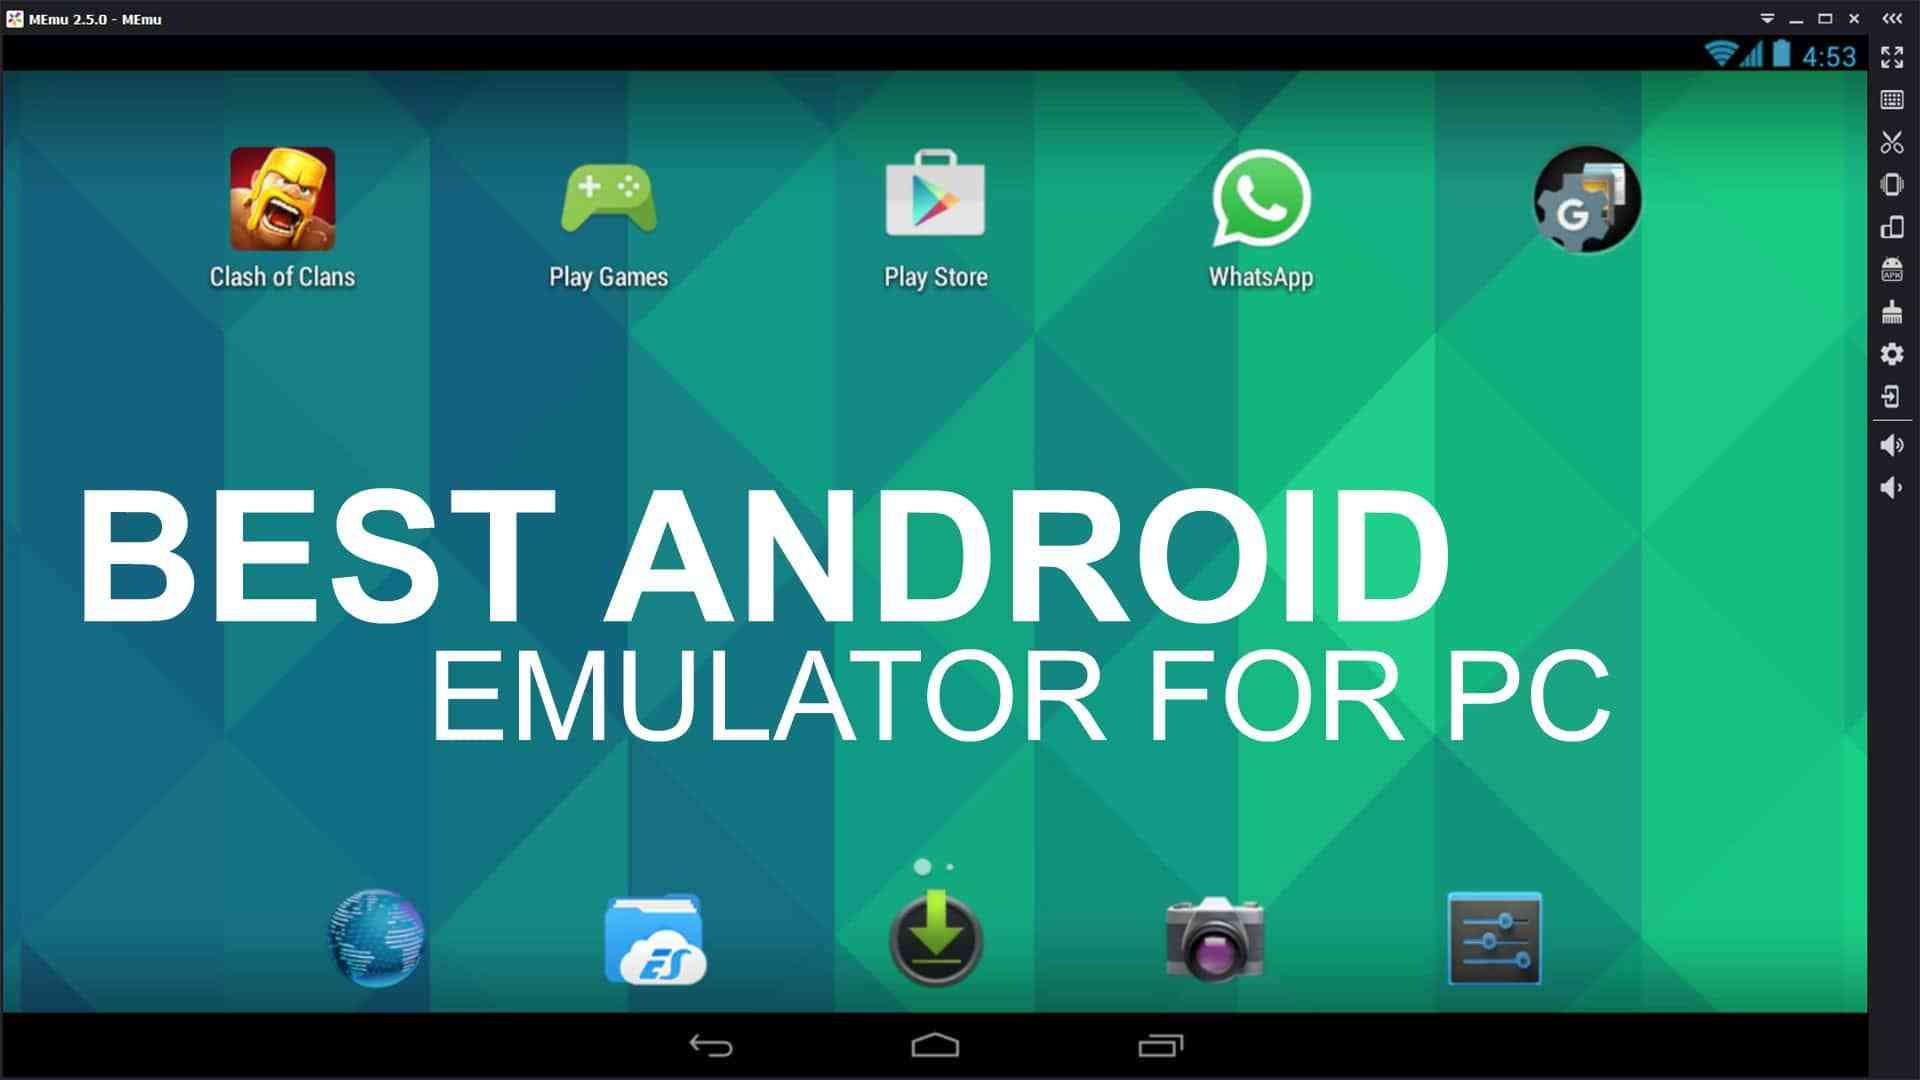 Best Free Android Emulators For Mac